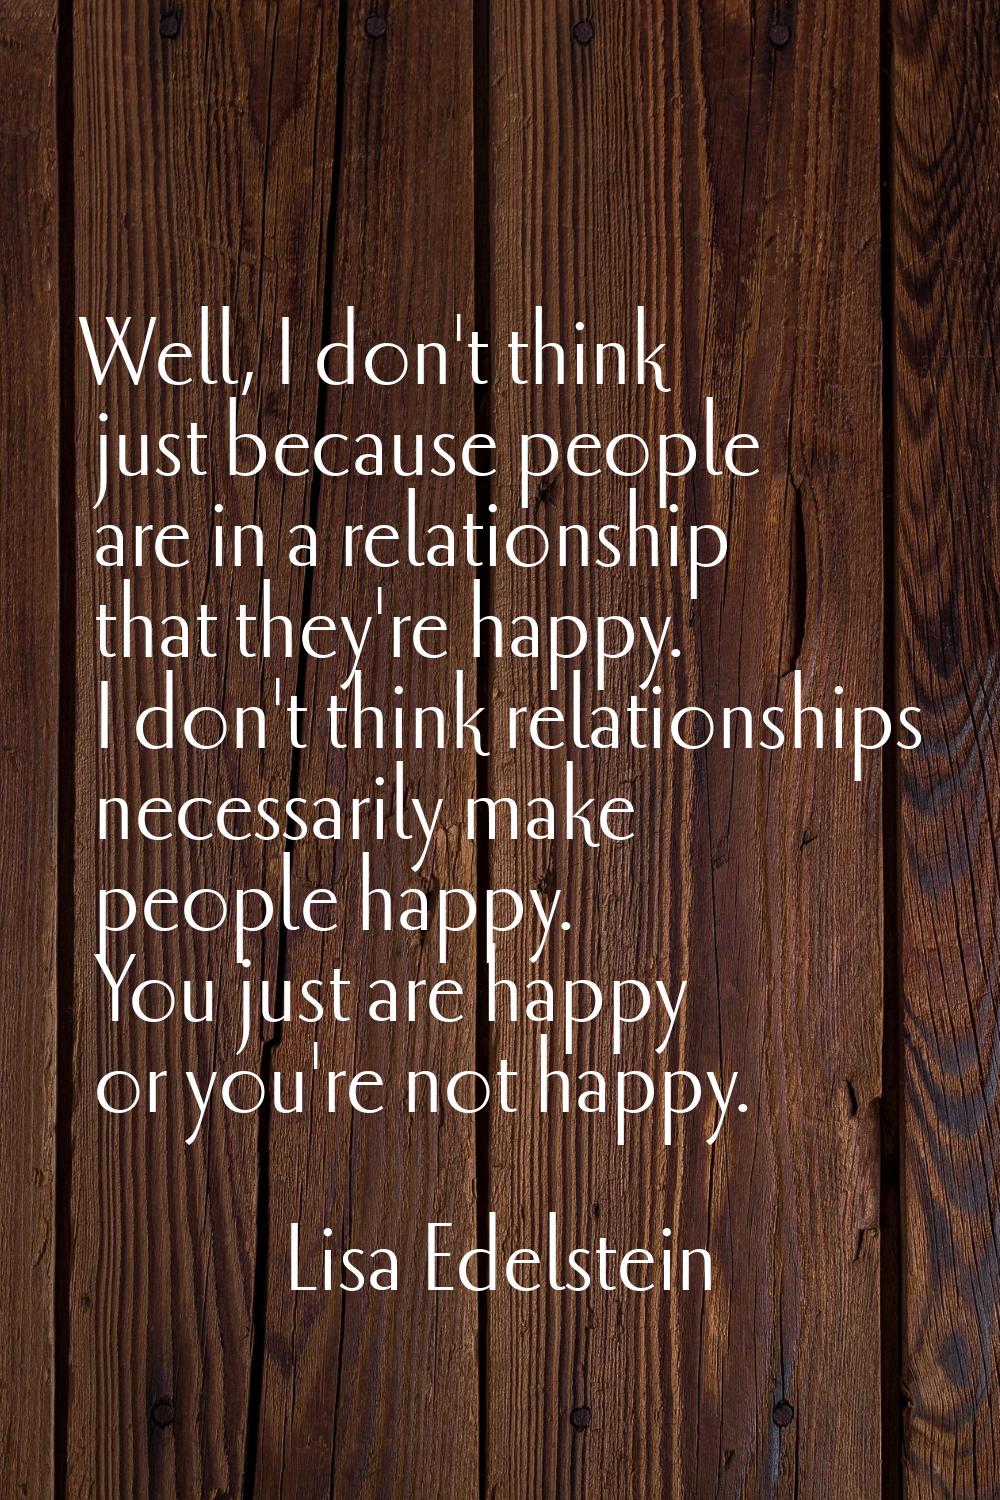 Well, I don't think just because people are in a relationship that they're happy. I don't think rel